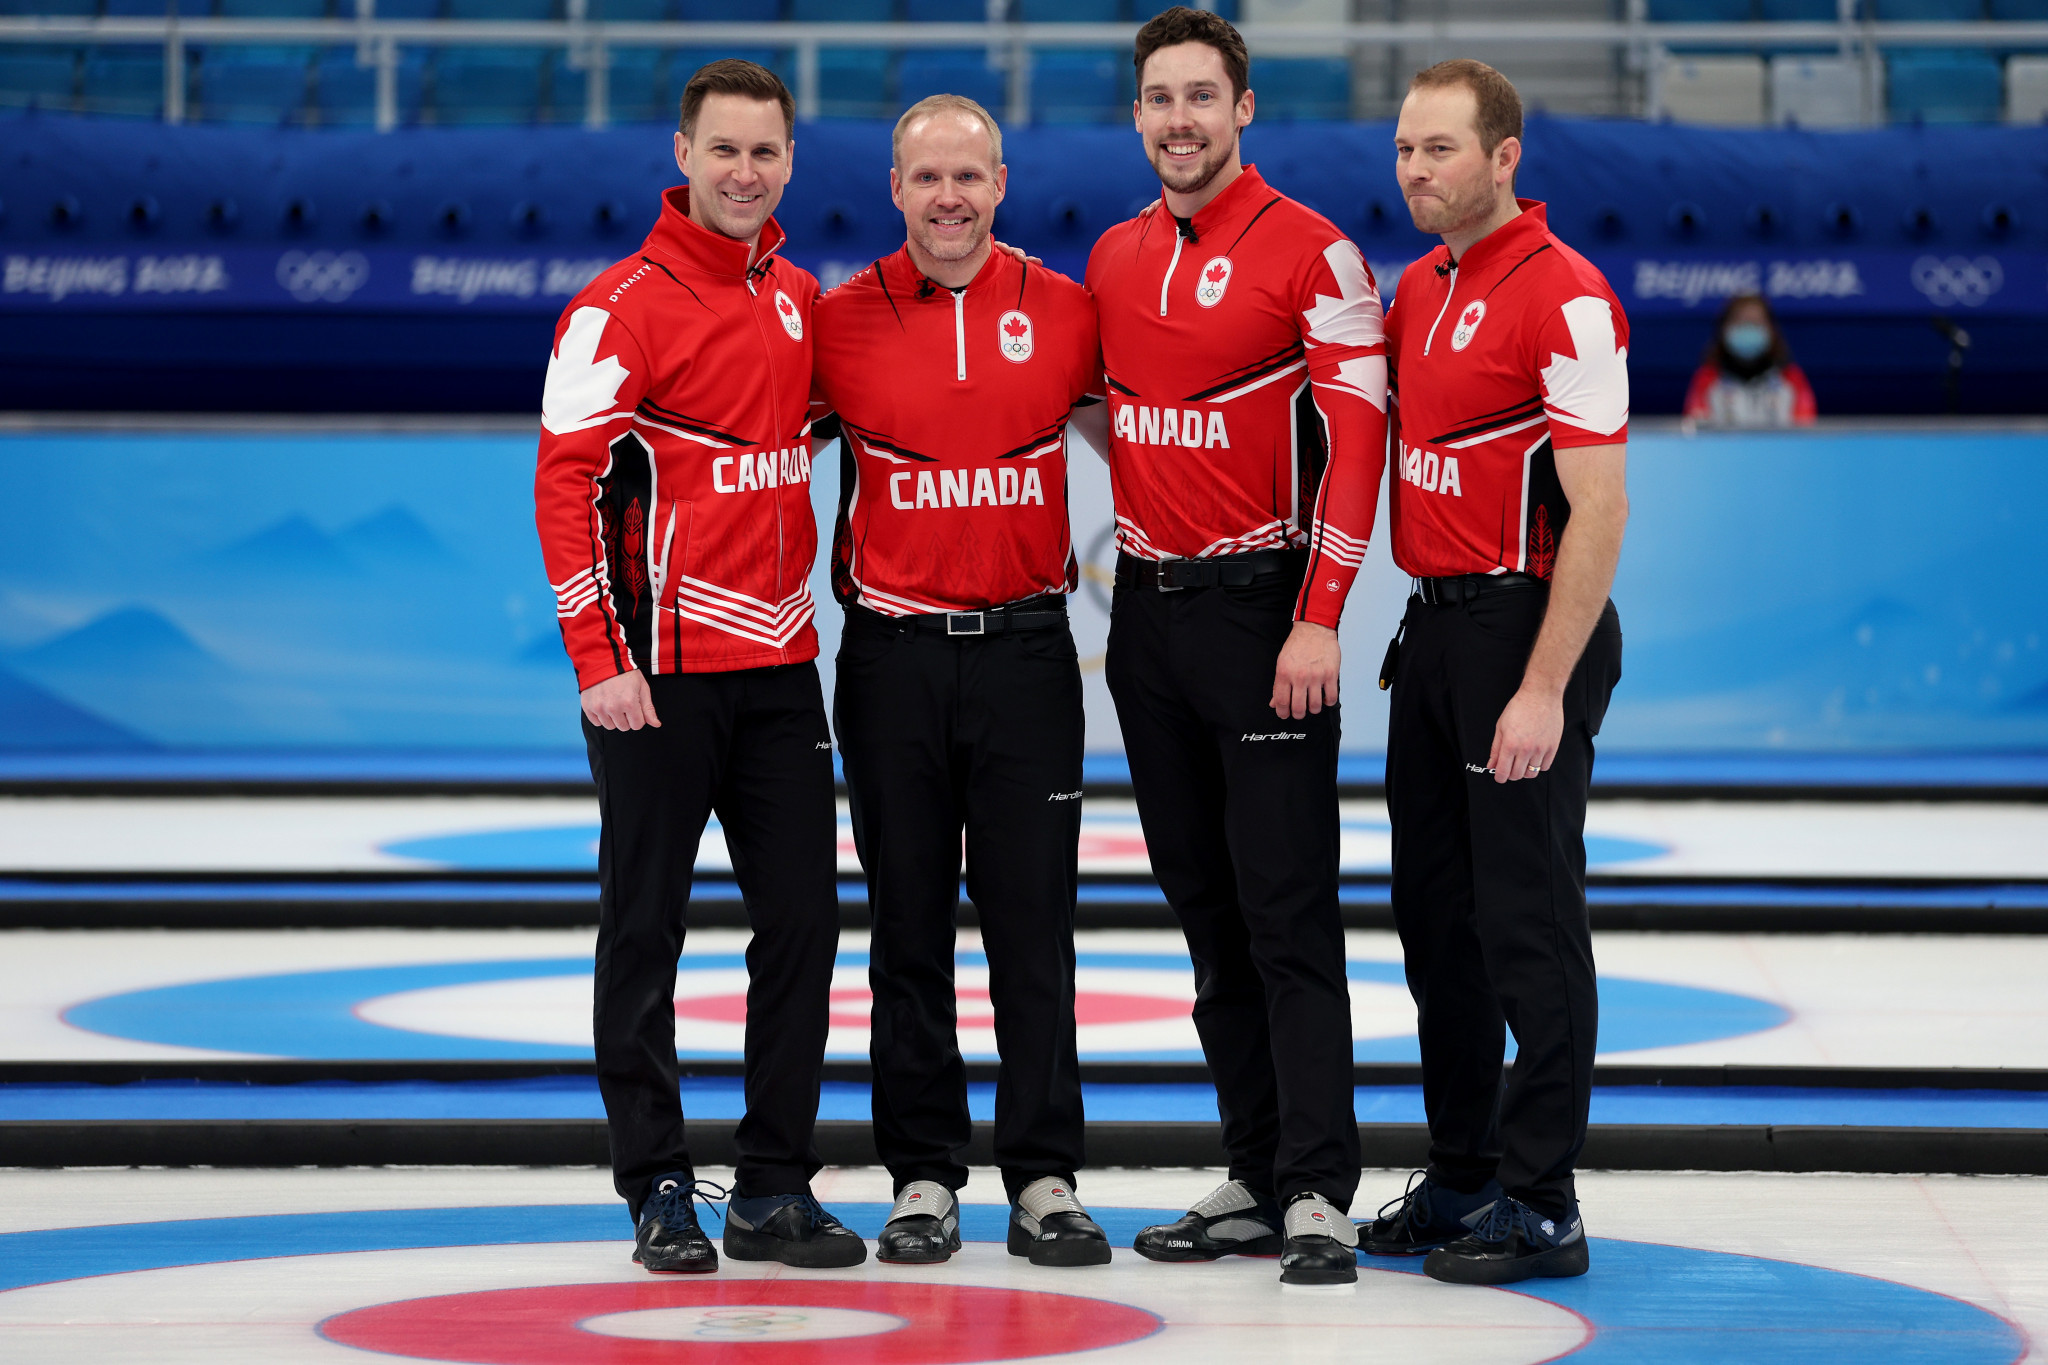 Team Einarson and Team Gushue claim titles at curling’s Champions Cup final